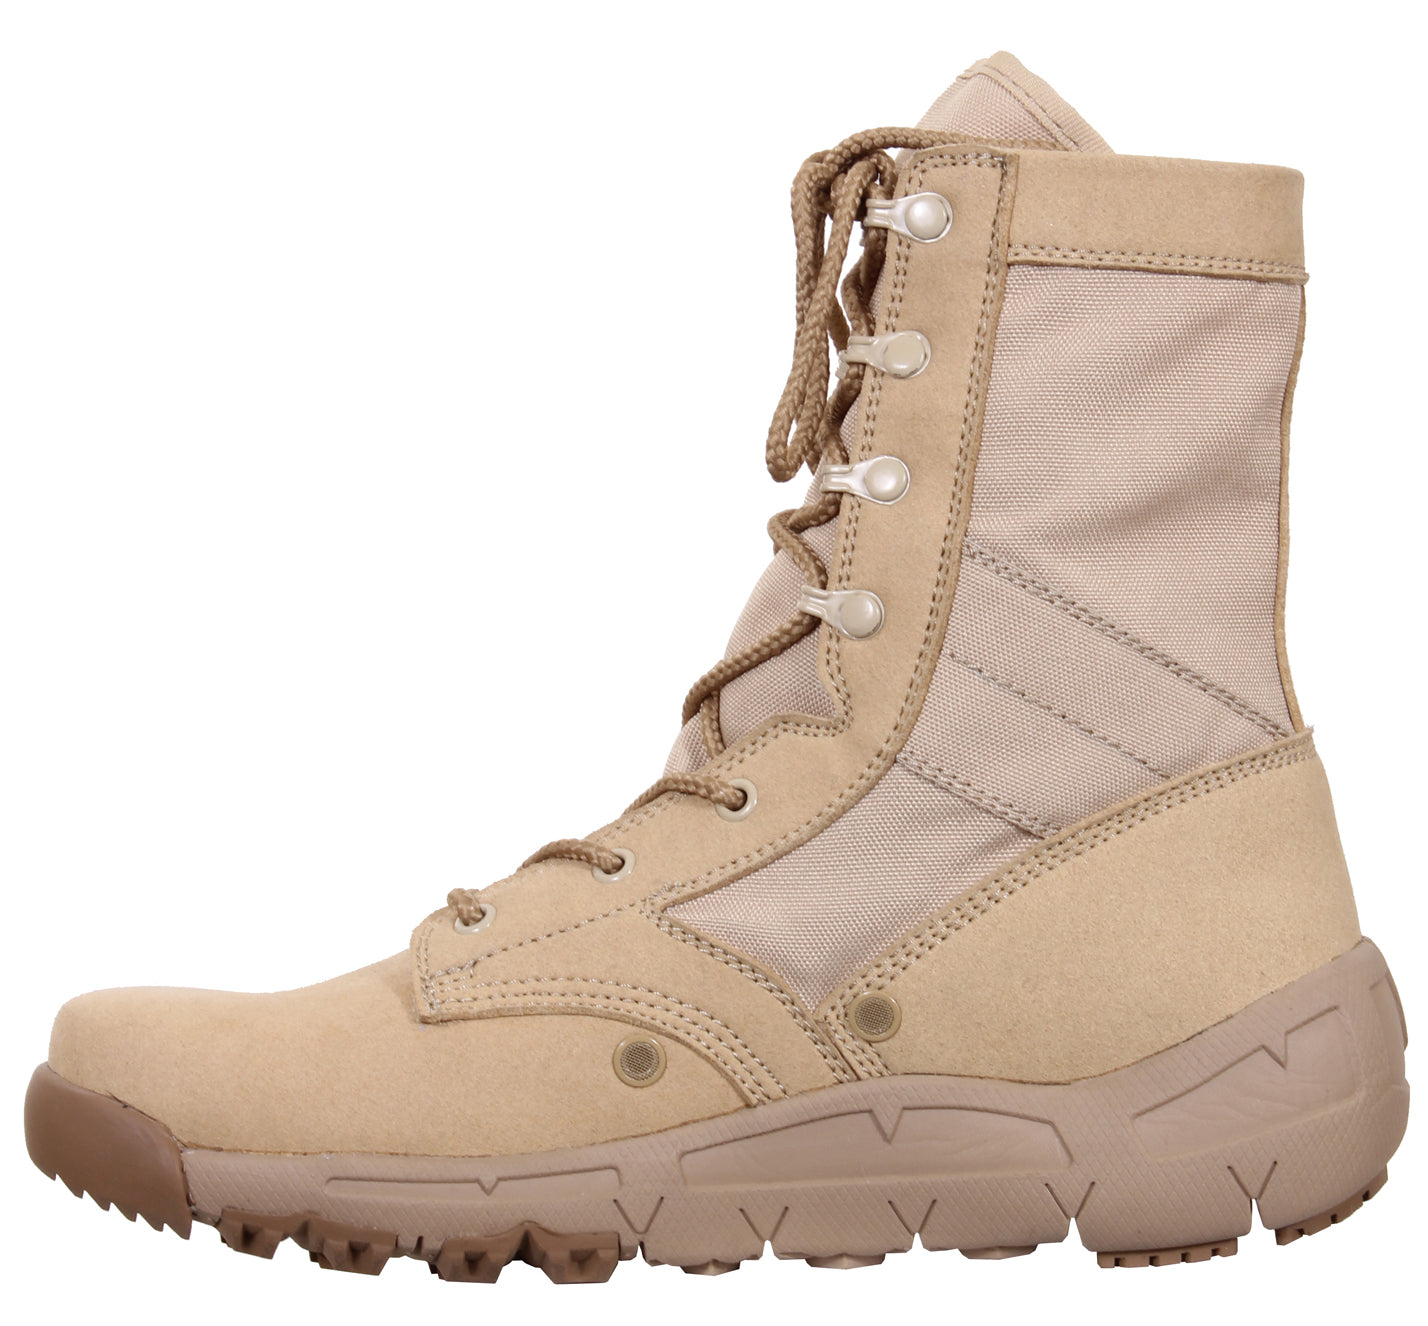 Rothco’s V-Max Lightweight Tactical Boot is the optimal choice for an all-purpose military-style boot.  Military-Style 8 ½” Cross Training Boot Is Designed With The Comfort And Support Of A Running Shoe The V-Max Lightweight Boot Interior Contains A Removable EVA Insole And 2 Screen Air Vents To Keep Your Feet Cool Rubber And EVA Outsole Provides Improved Traction While You Are On The Move Iron Eyelet Lace System Will Keep Your Tactical Boots Tightly Secured